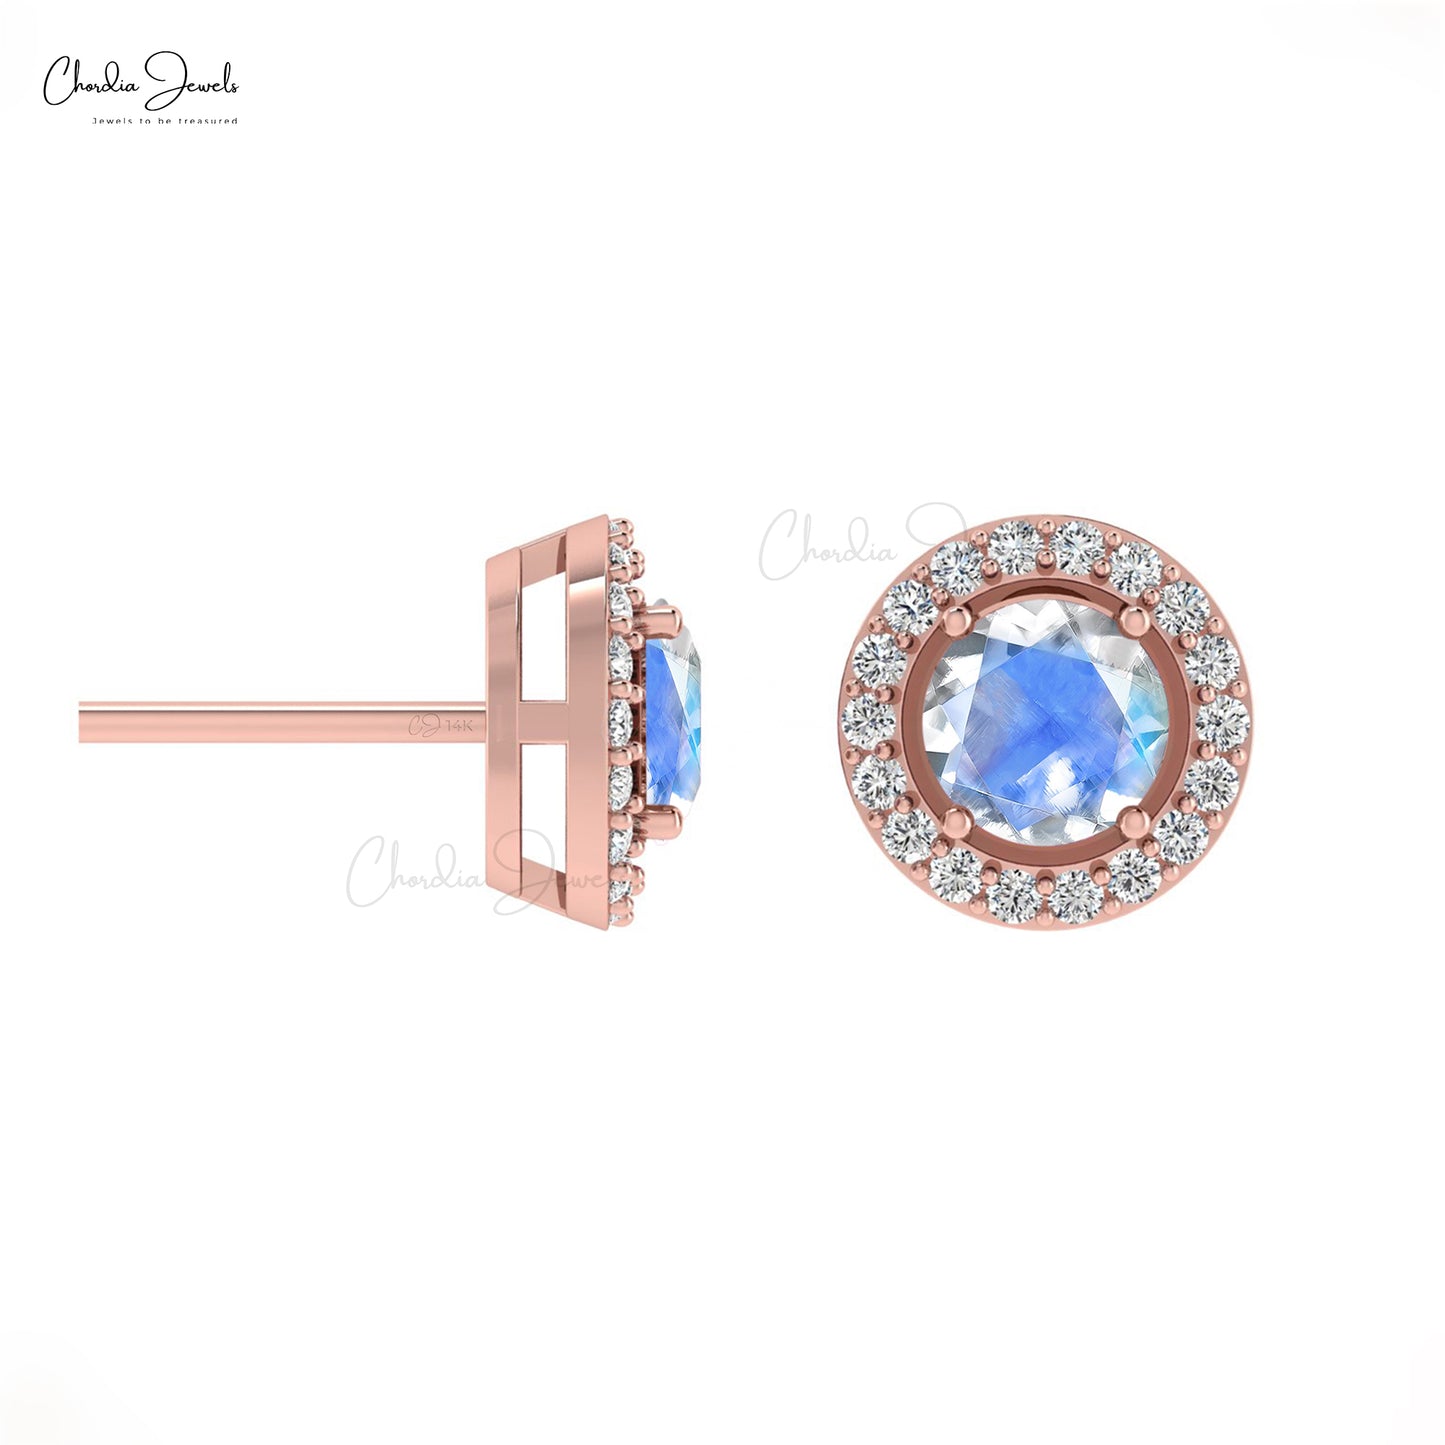 Authentic Rainbow Moonstone & Round Diamond Halo Earrings In 14K Gold For Women